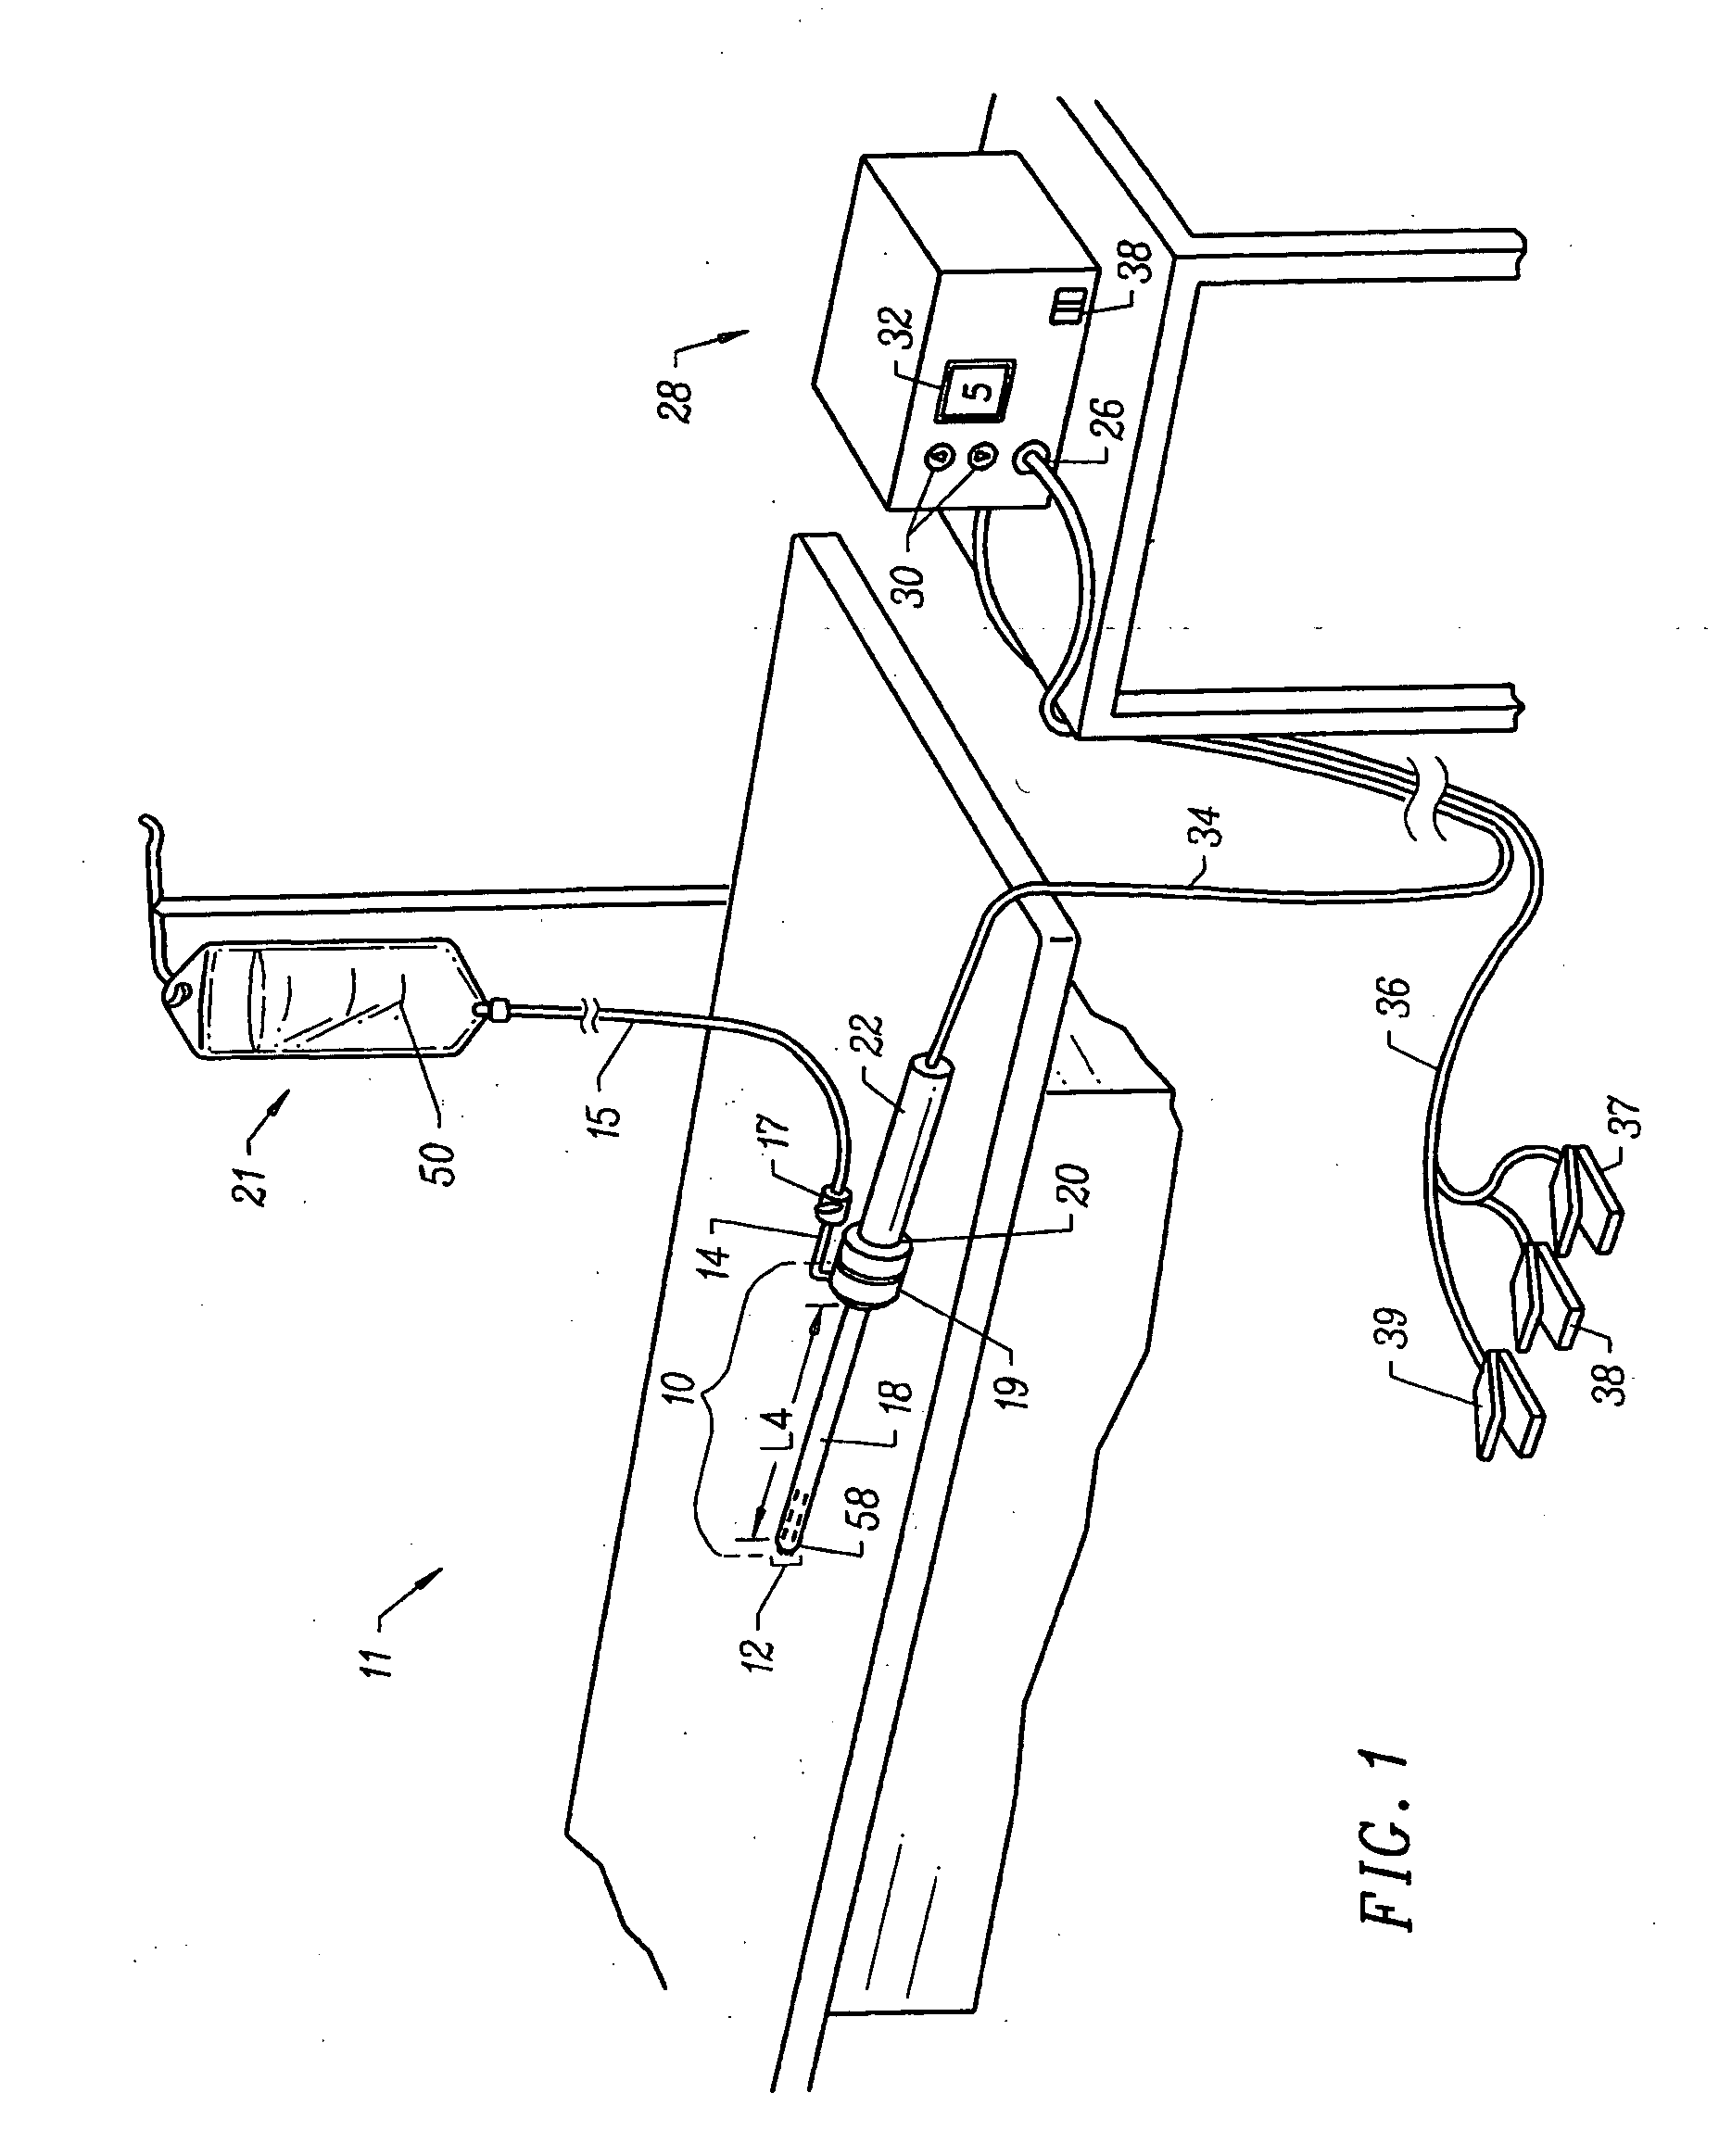 Systems and methods for electrosurgical tissue contraction within the spine